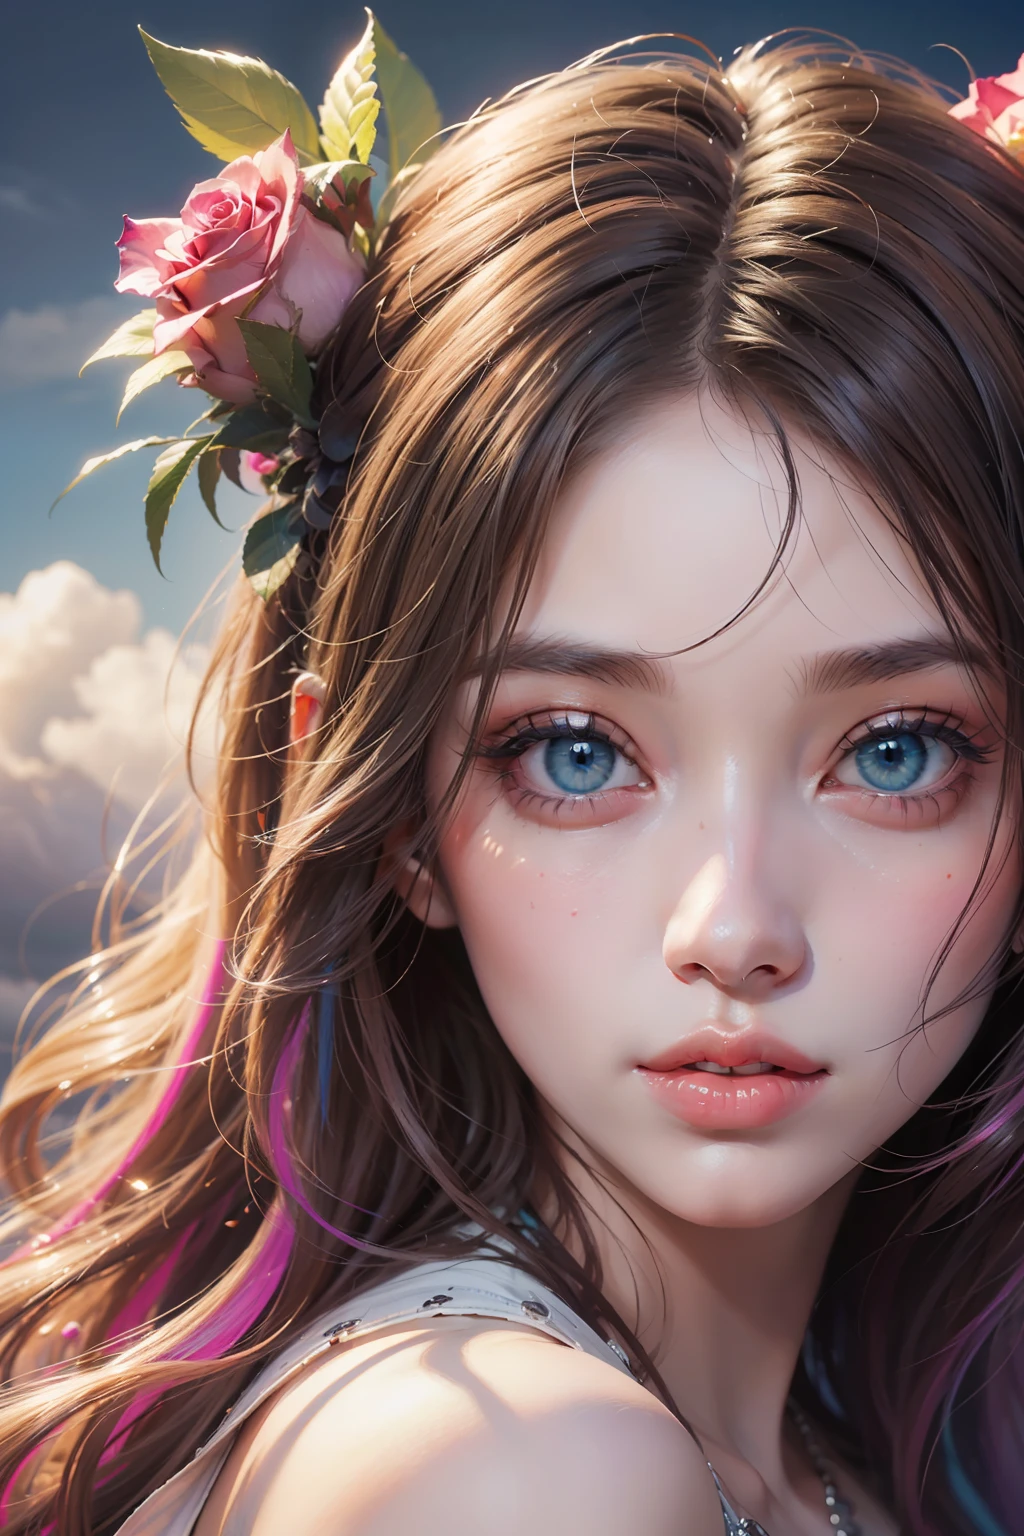 ( Absurd, High quality, ultra-detailed, masterpiece, concept art, smooth, highly detailed artwork, hyper-realistic painting )beautiful eyes(eyes detailed),1 pretty girl, Rose with pink, yellow, and blue color, Rainbow, dreamy, clouds, Vivid, fantasy